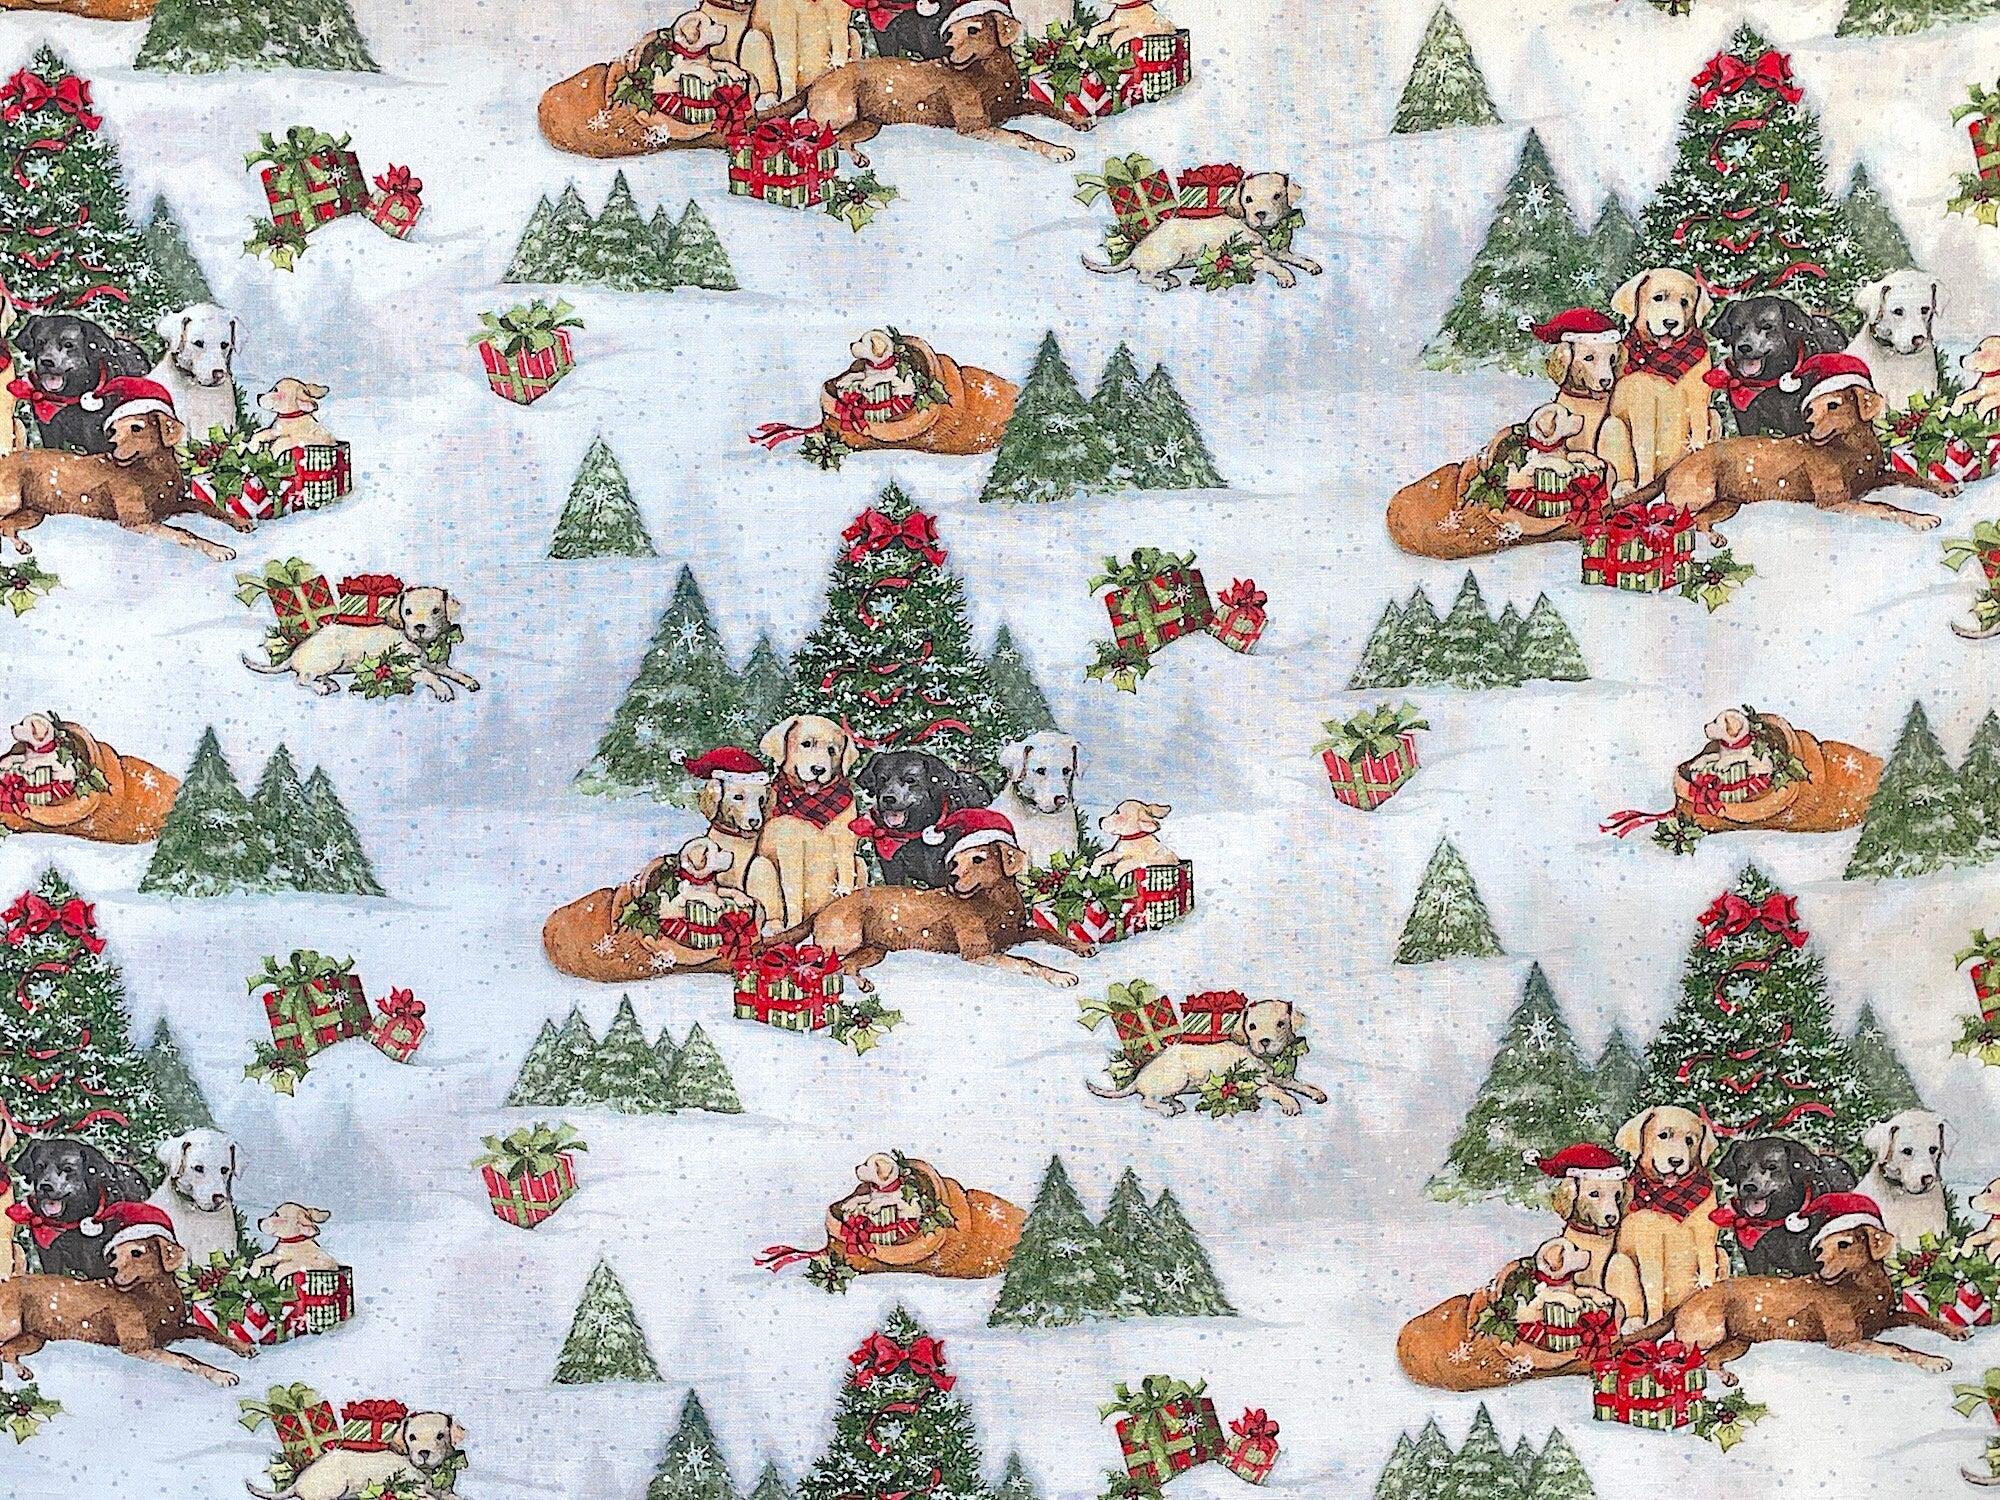 This holiday fabric is covered with dogs wearing Christmas hats and scarves. some of the dogs are sitting by a Christmas tree while others are checking out the gifts. The background is snow covered.